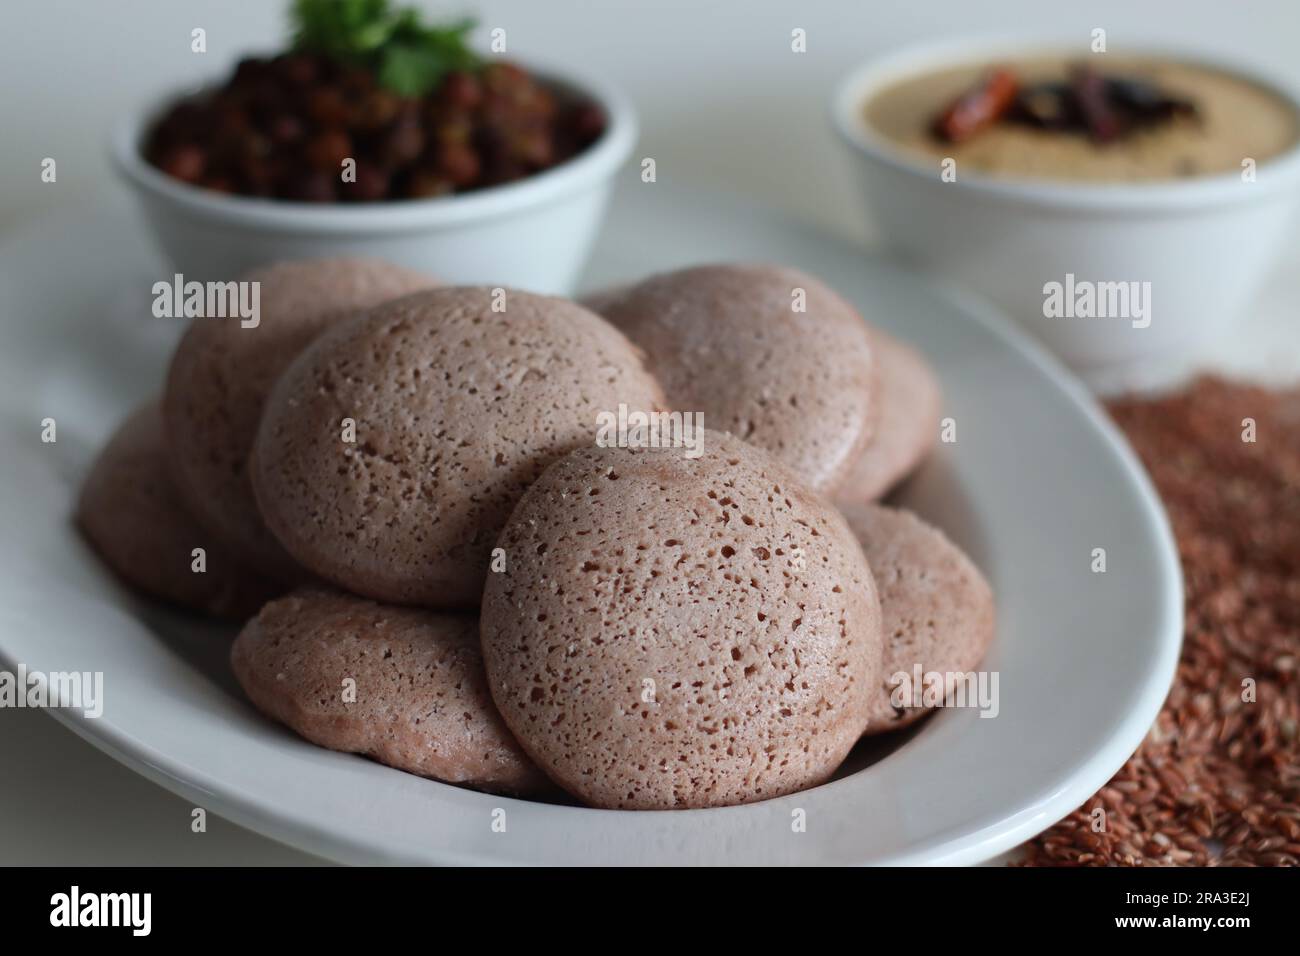 Navara rice idly served black chickpea curry. Steamed savoury rice cake made by a batter of fermented de husked black lentils and navara rice. Navara Stock Photo